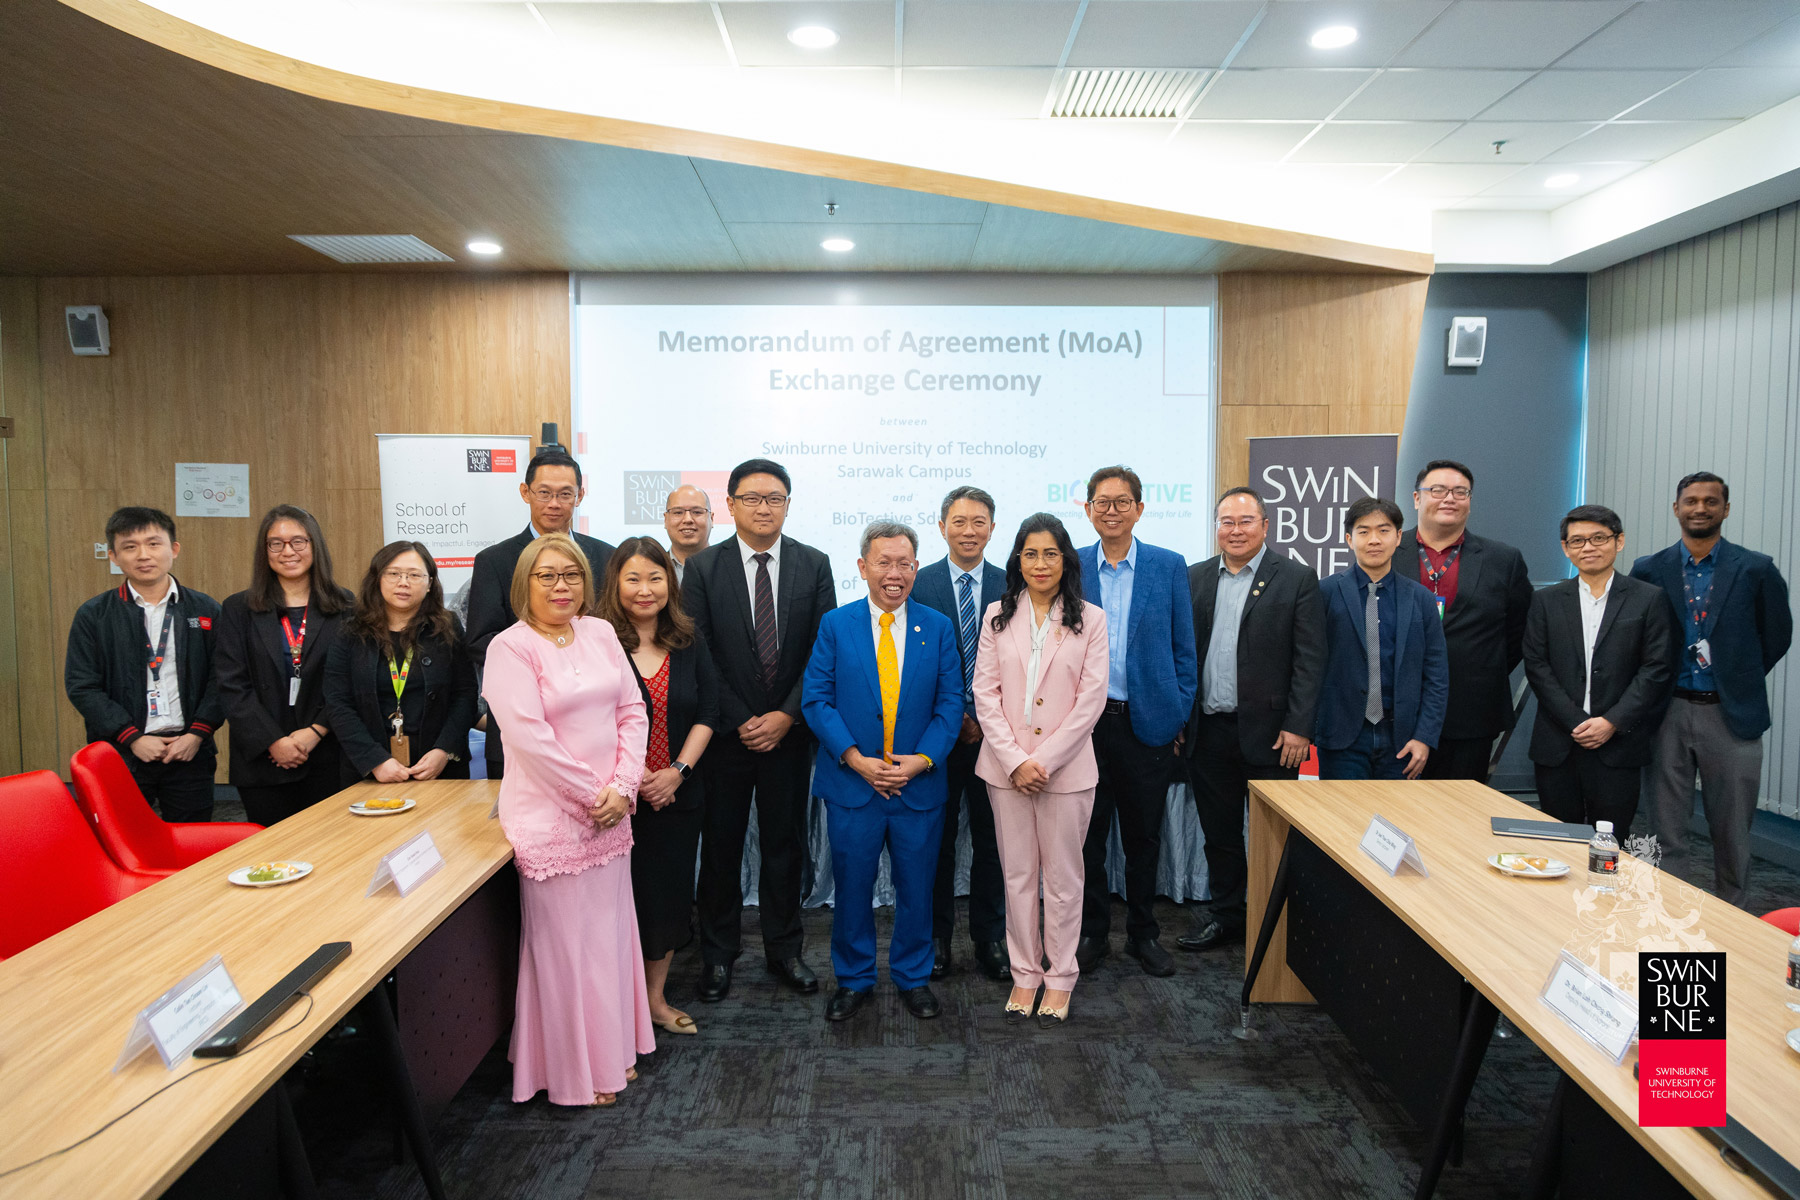 A group photo taken at the MoA Exchange Ceremony. Seen are YB Datuk Amar Professor Dr Sim Kui Hian (centre), Professor Patrick Then (centre left), (from centre right) Mr Peter Ting Yiik Pung, Professor Dr Ida Fatimawati bt Adi Badiozaman, Mr Simon Lau Kiing Kang, Mr William Liang Tak Chiang and others. 